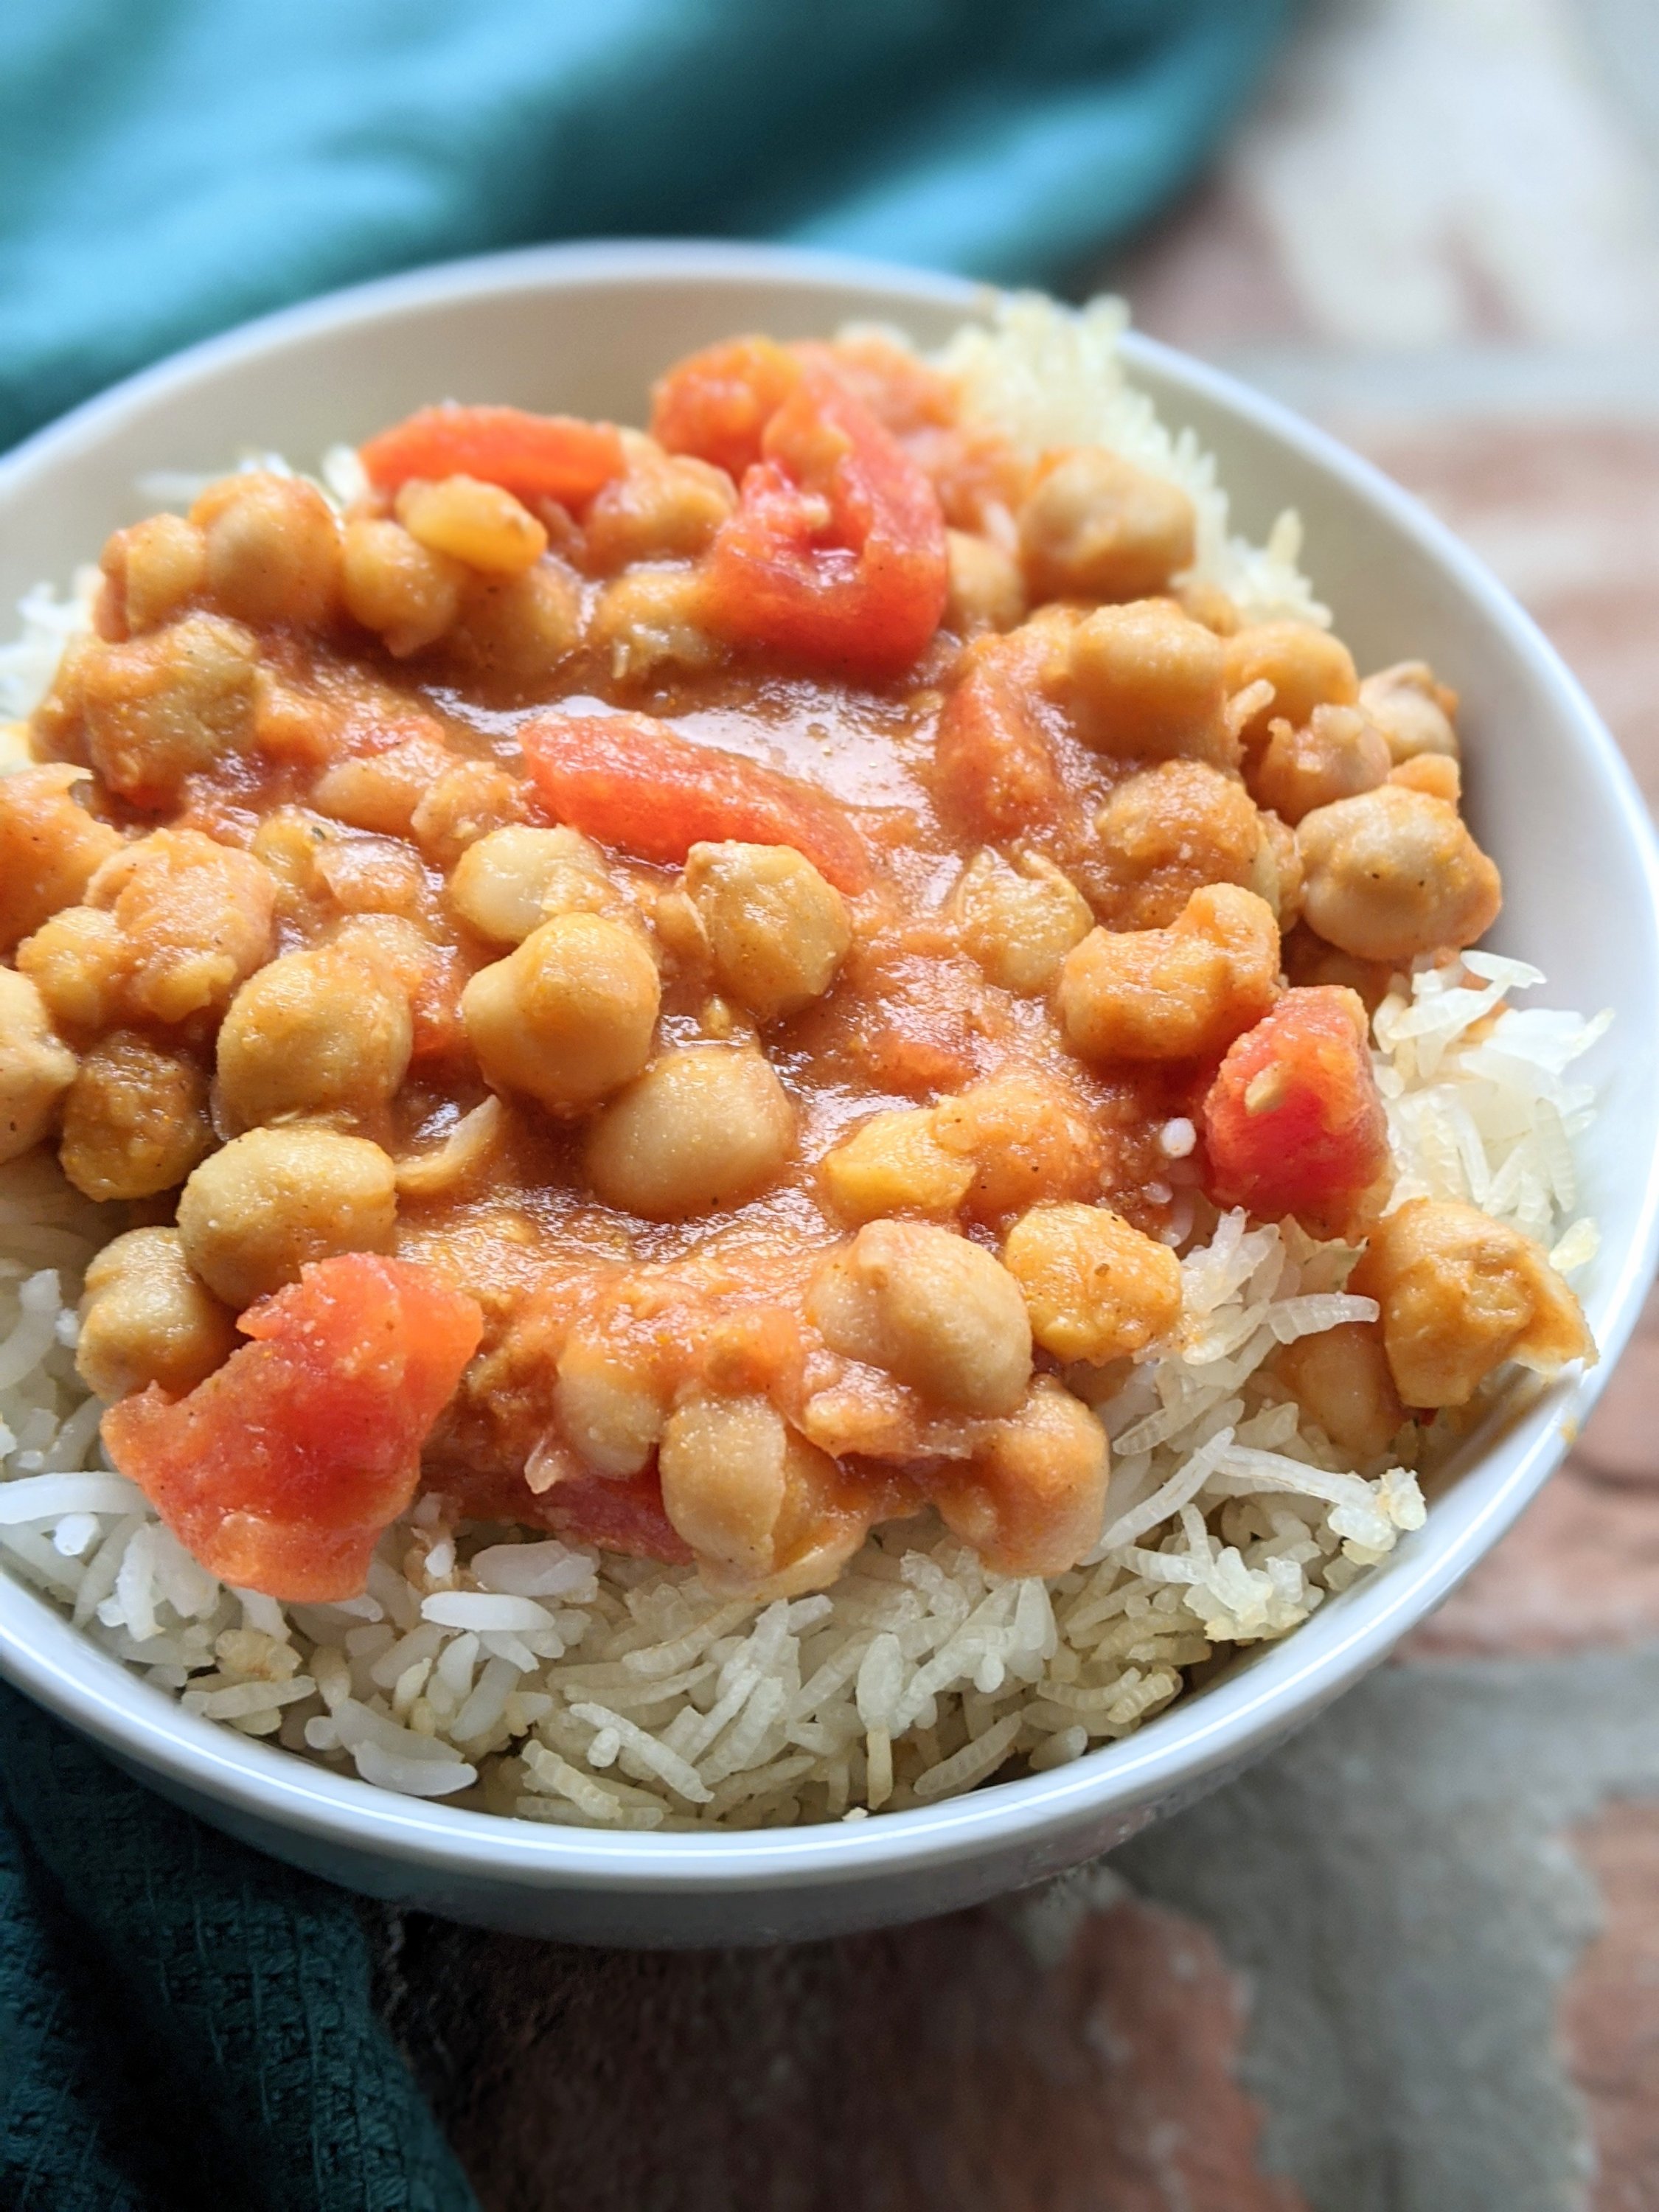 chana masala with canned chickpeas recipe vegan dinner recipes healthy pantry chickpea recipes meals homemade indian food